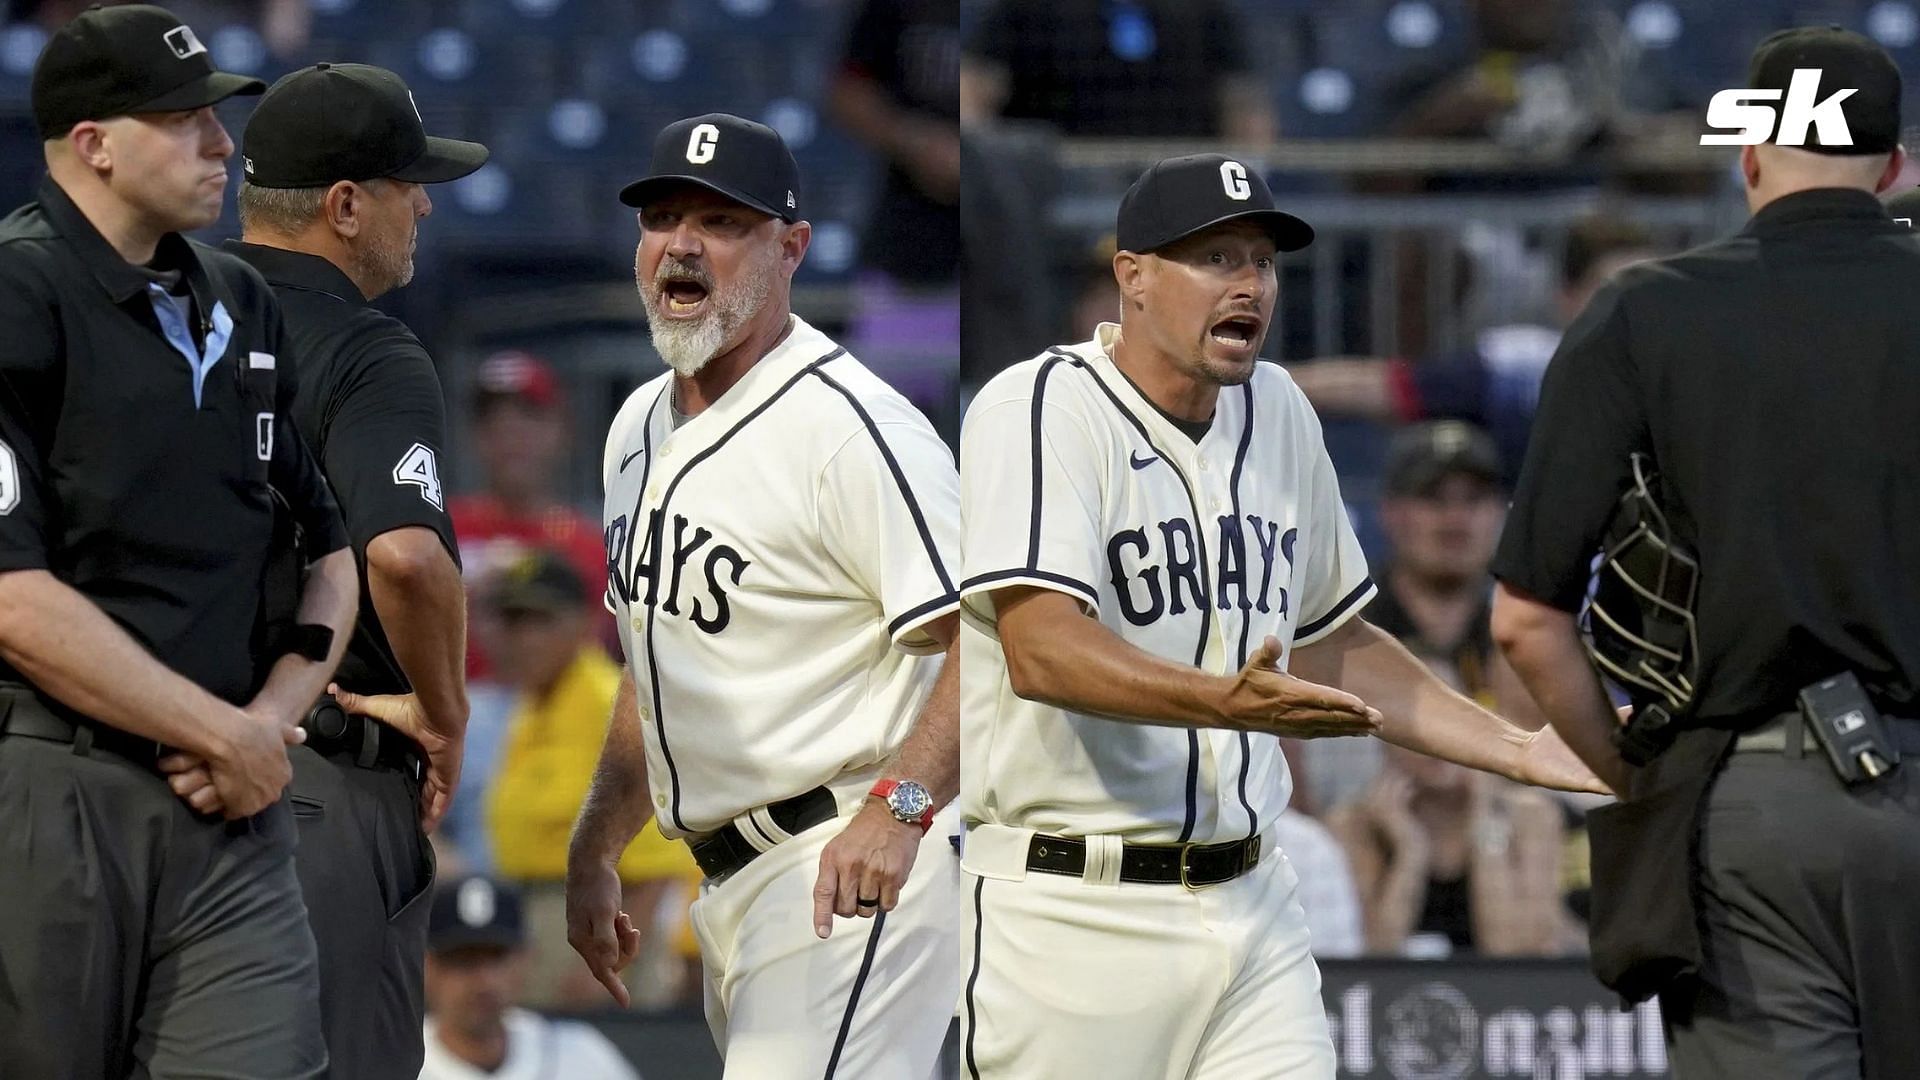 Pirates manager, bench coach and pitching coach ejected 